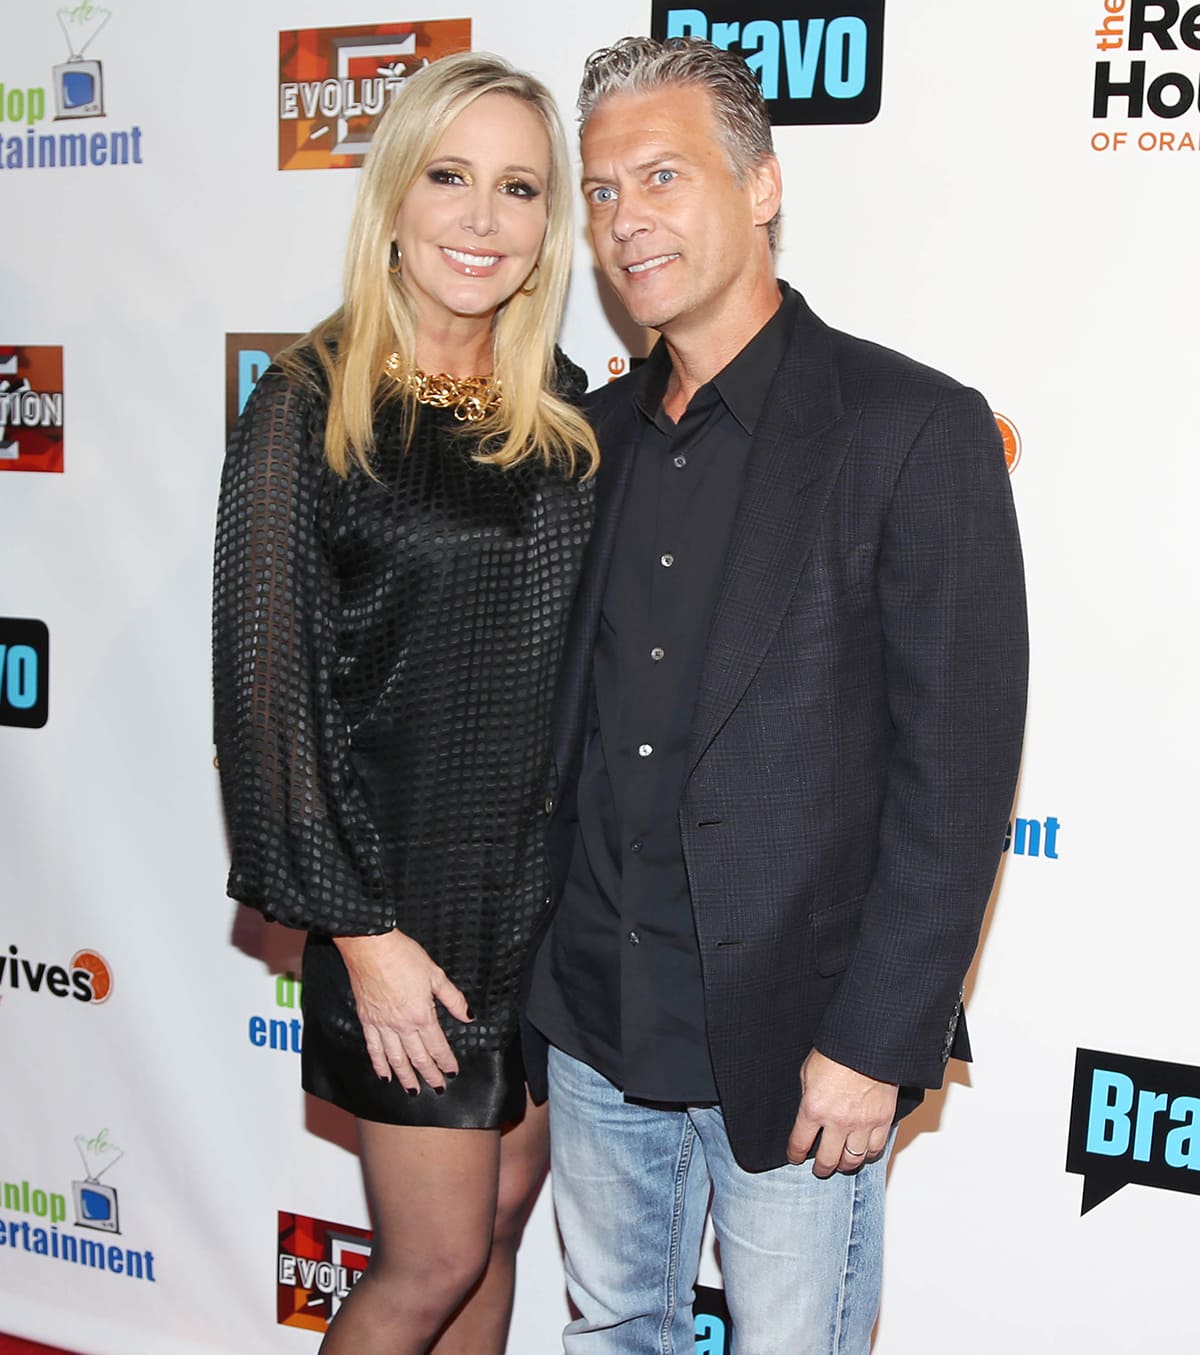 Much of Shannon Beador's wealth comes from her former husband, Beador Construction founder David Beador, and her salary from RHOC, bookings, endorsement deals, and network-sponsored events